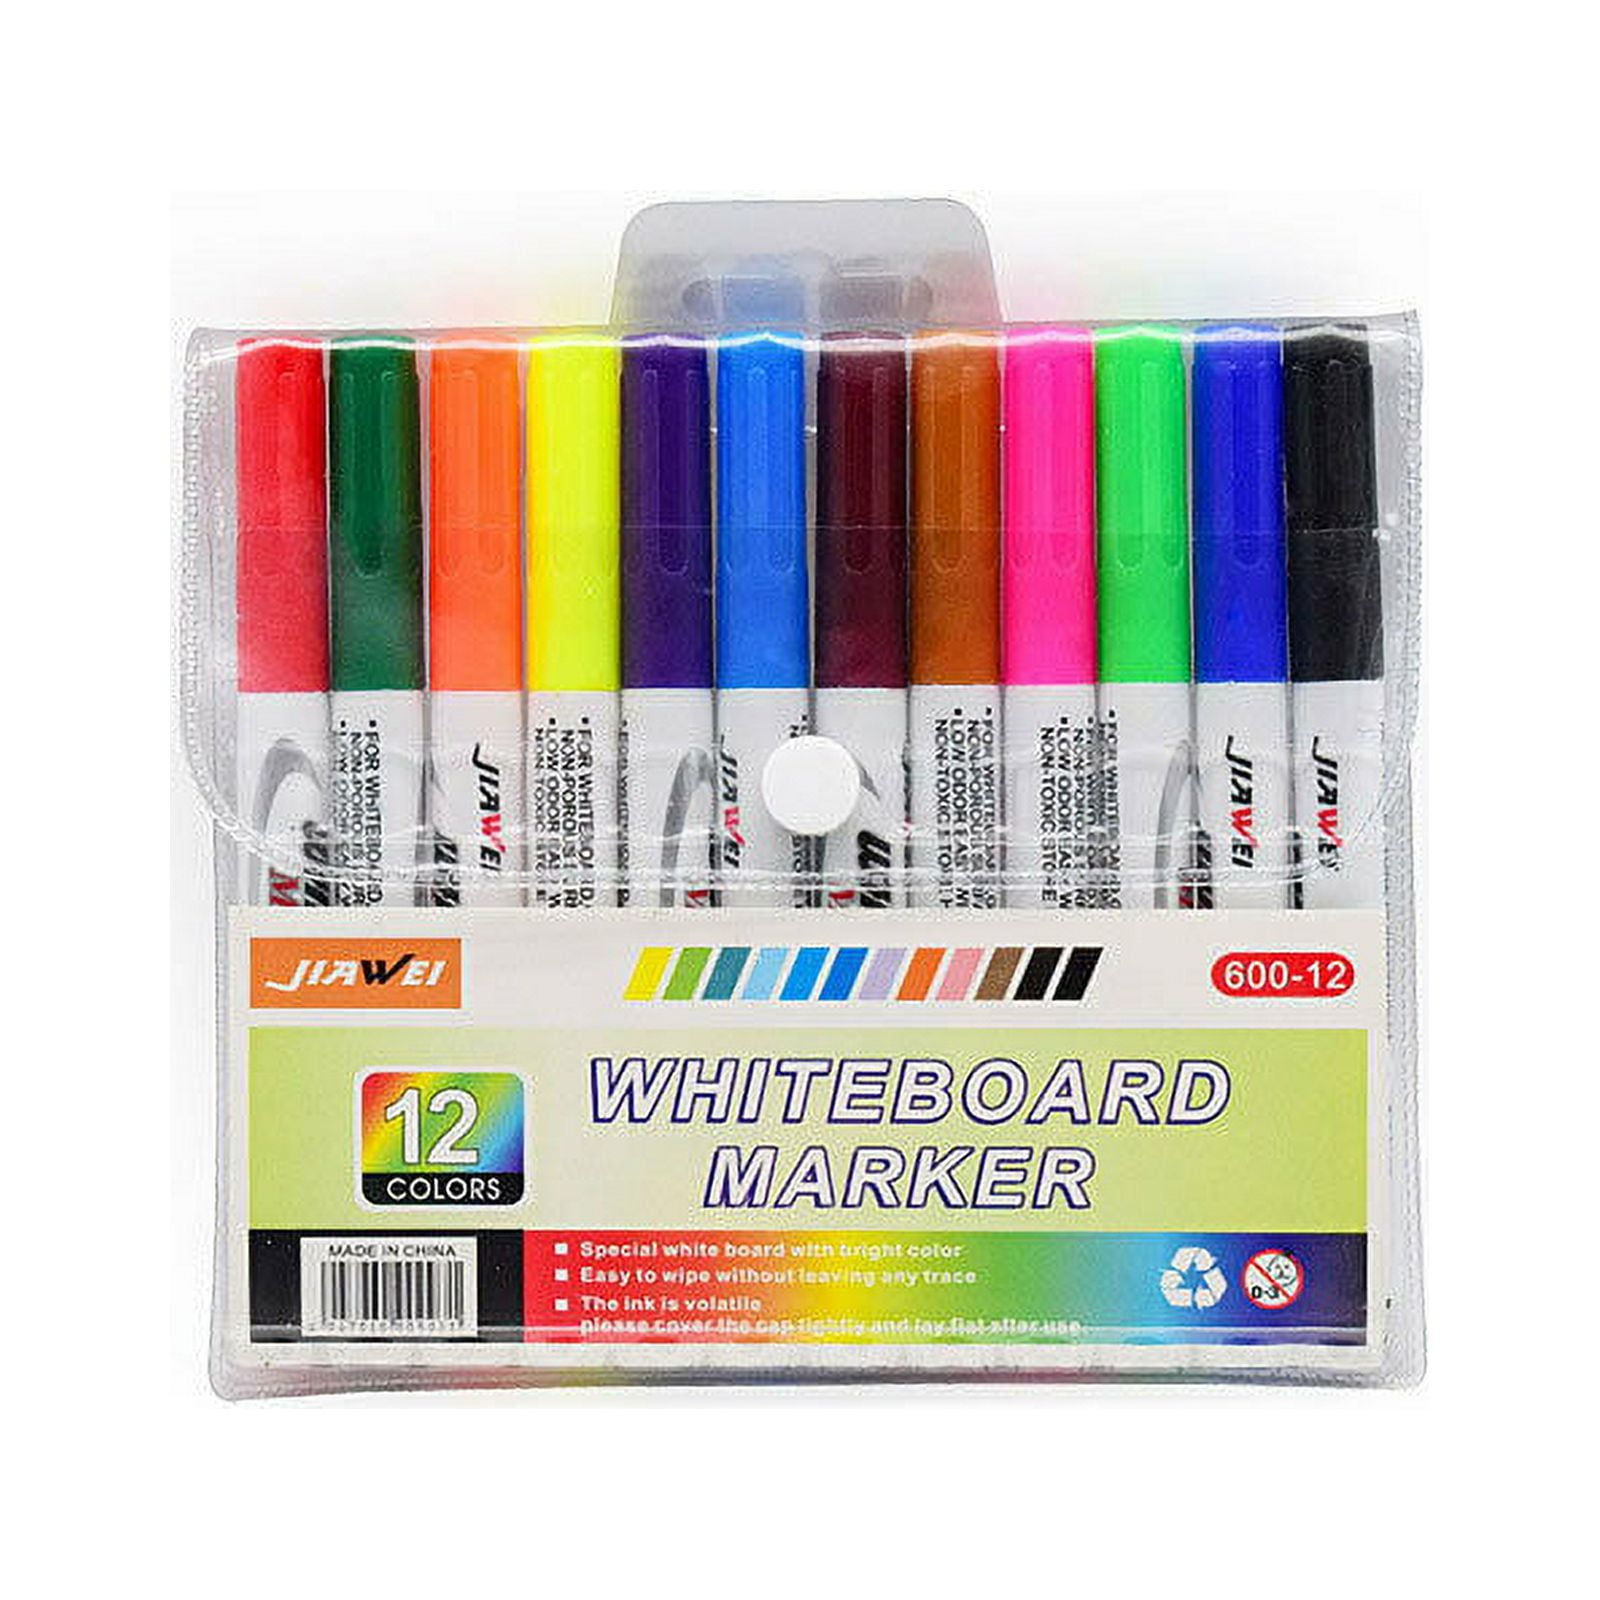  Yuliyaya Dry Erase Markers, Washable Markers for Kids, Fine Tip  Whiteboard Markers, 12 Pack Magic Water Painting Pens, Floating Ink  Drawings, Graffiti Markers, Tattoo Marker Gifts for Boys Girls : Toys